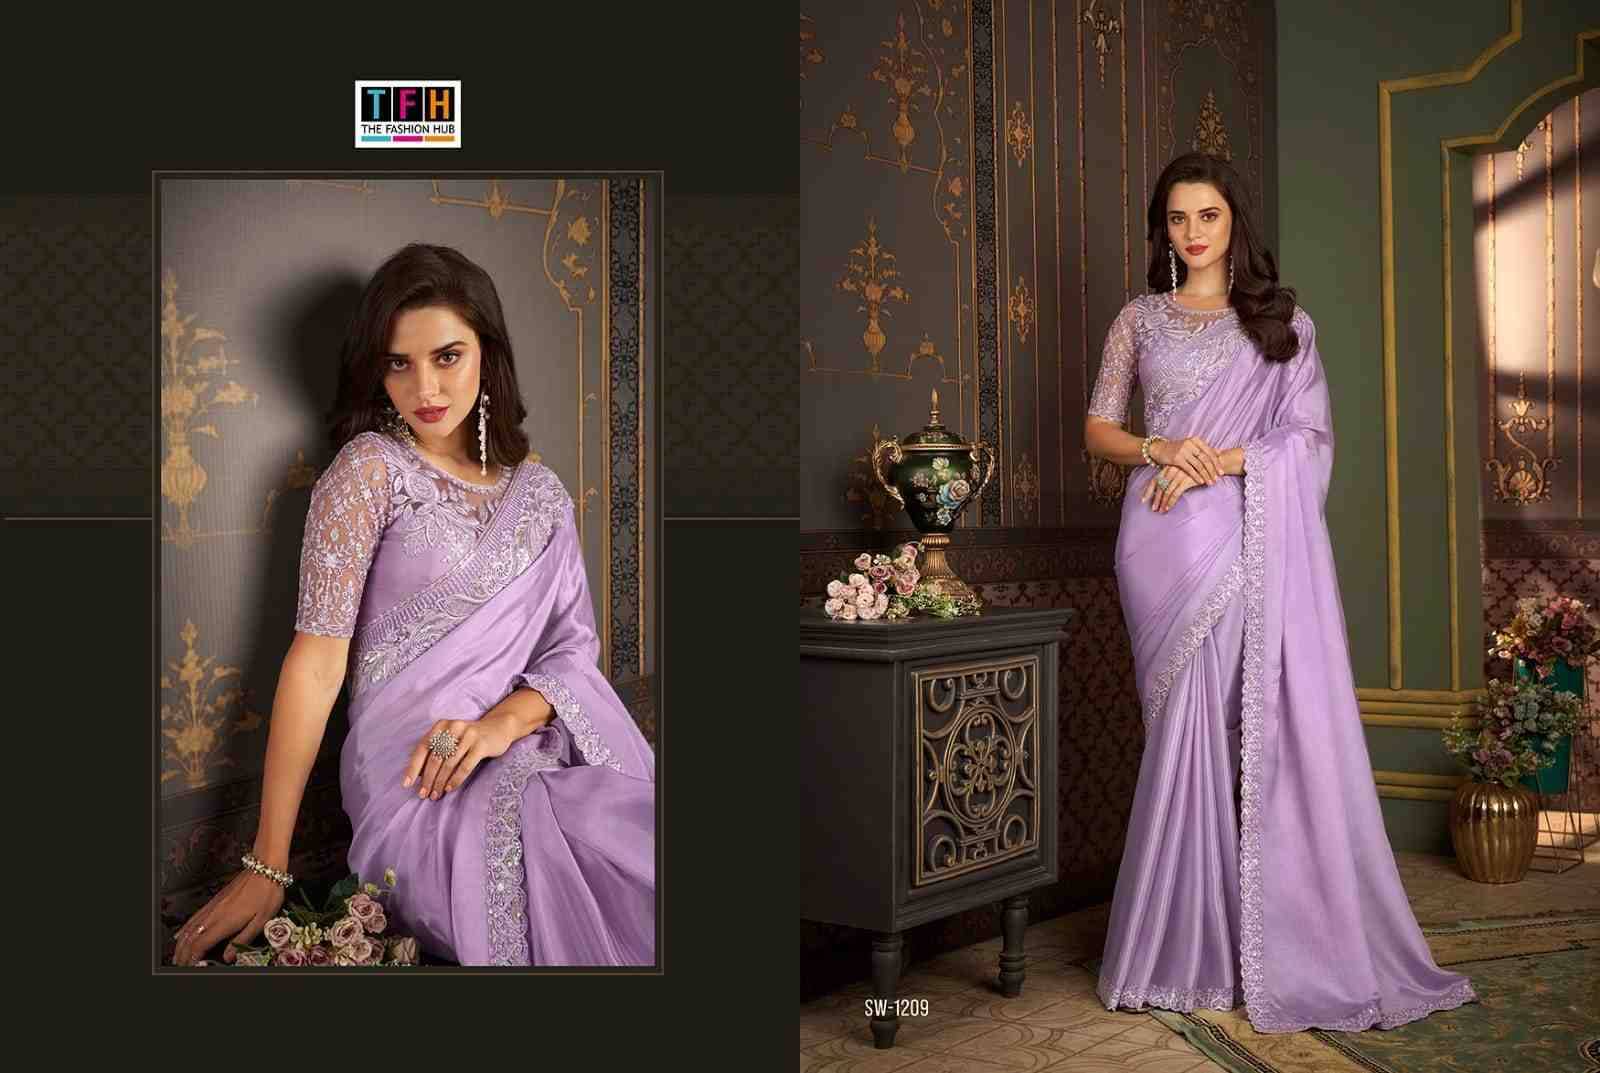 Sandalwood Vol-12 By Tfh 1201 To 1218 Series Indian Traditional Wear Collection Beautiful Stylish Fancy Colorful Party Wear & Occasional Wear Chiffon Sarees At Wholesale Price